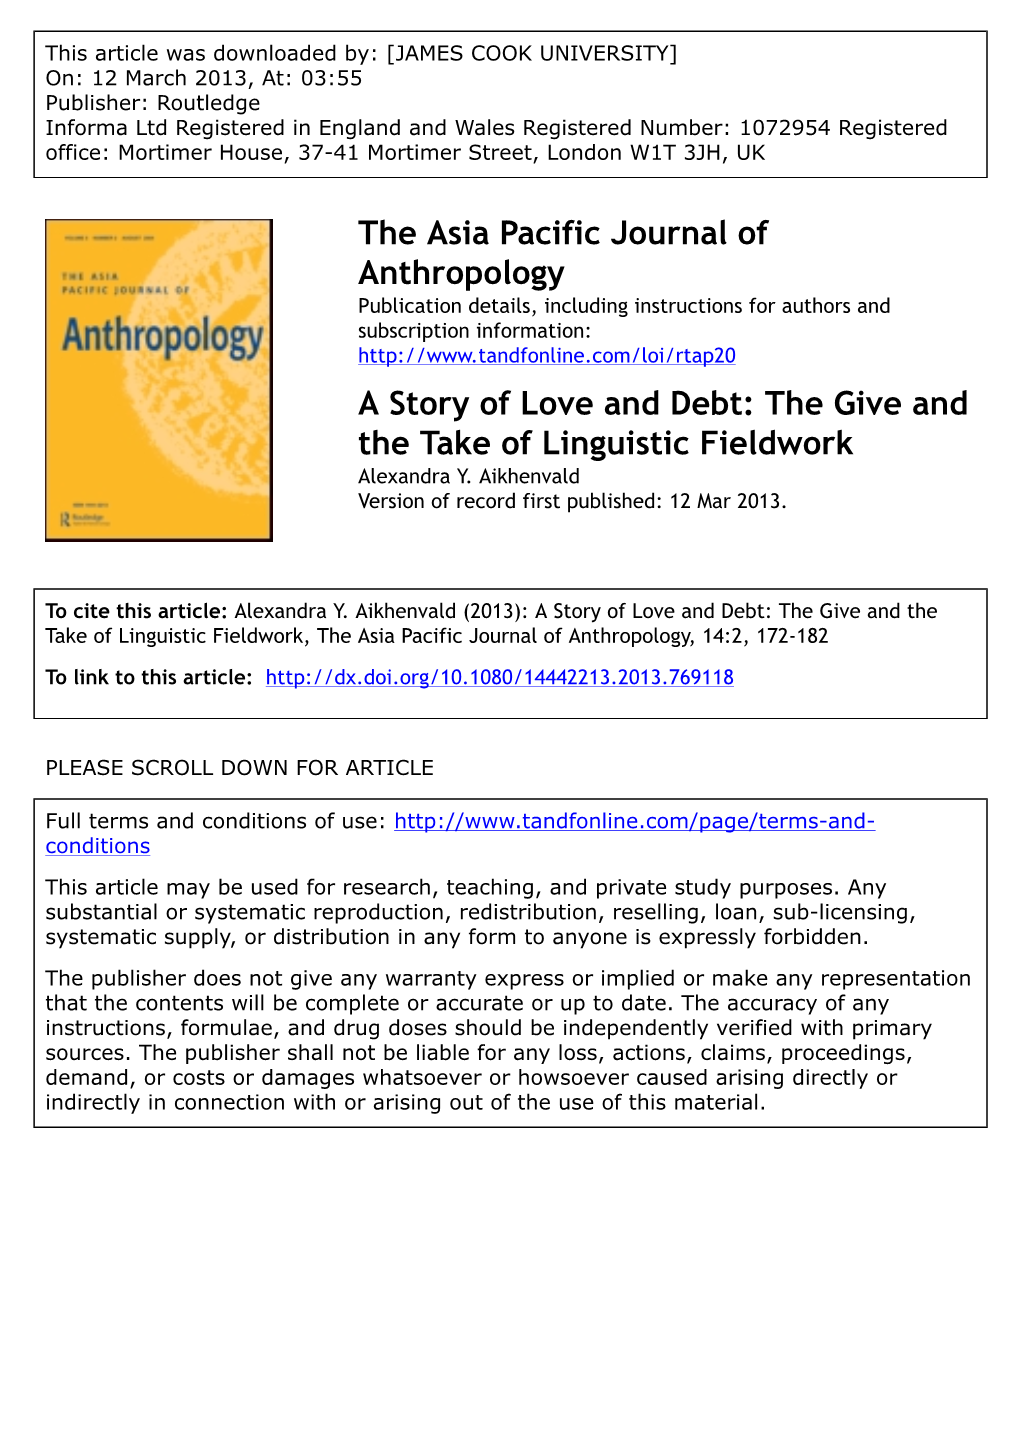 A Story of Love and Debt: the Give and the Take of Linguistic Fieldwork Alexandra Y